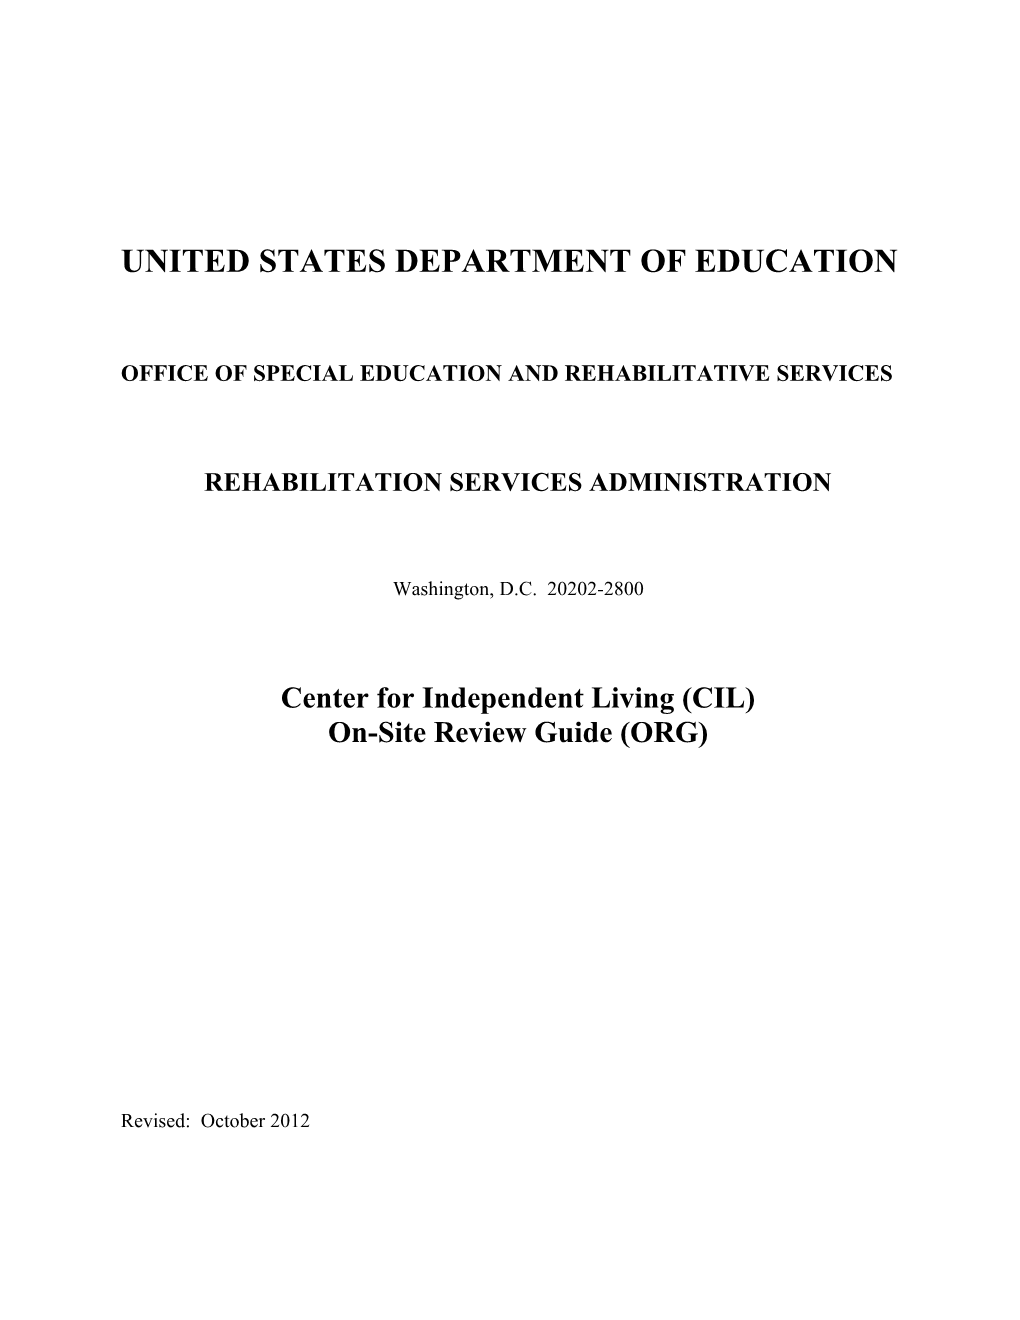 RSA Center for Independent Living (CIL) On-Site Review Guide (ORG) (PDF)